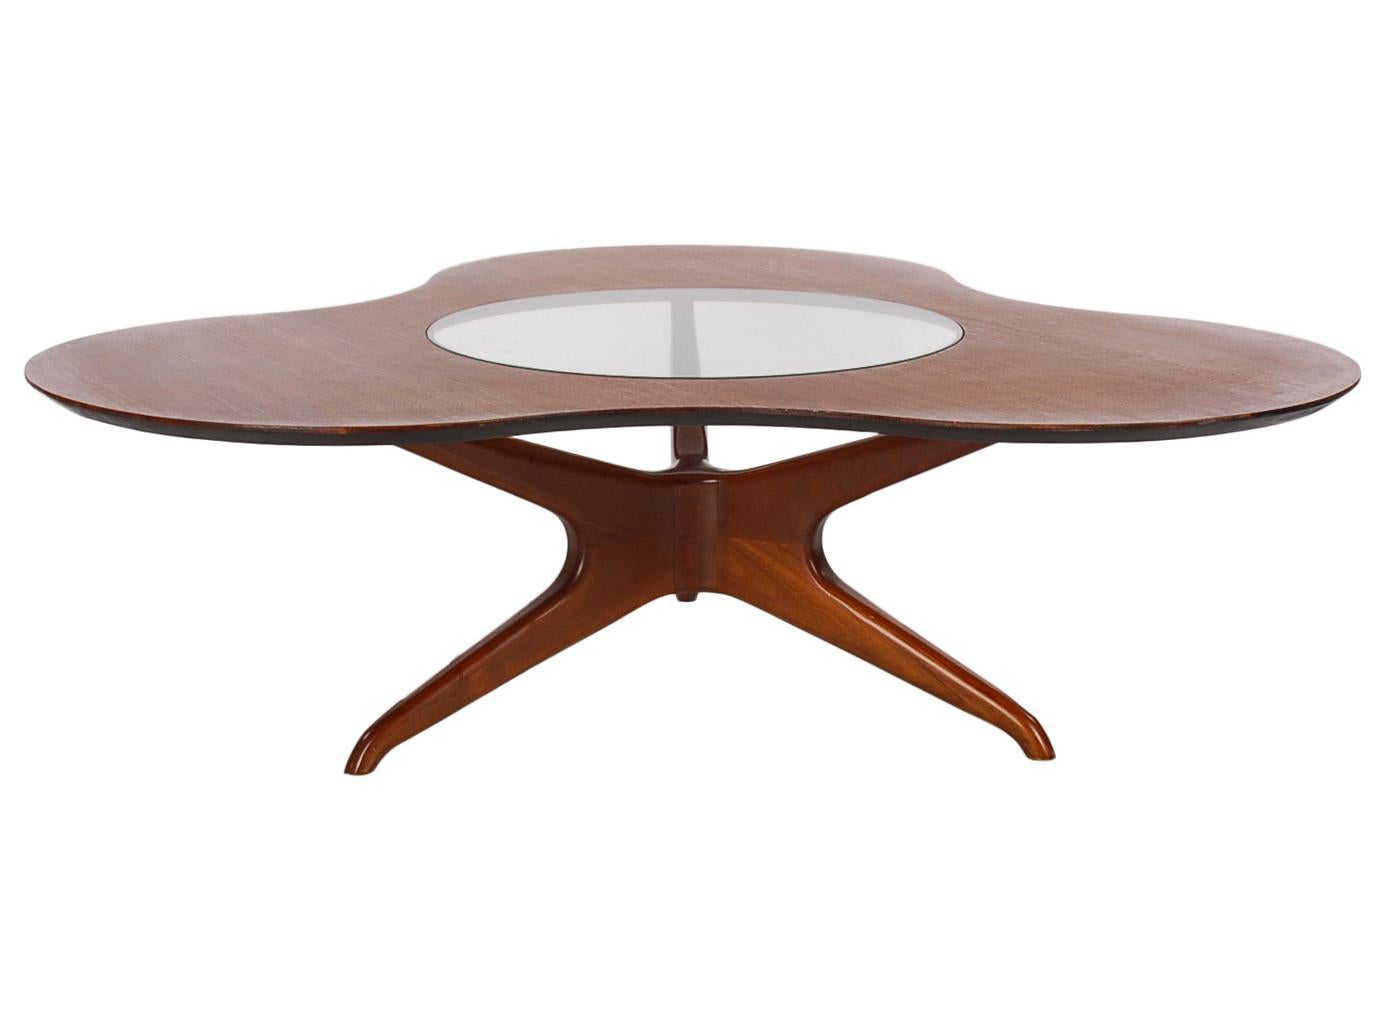 American Midcentury Italian Modern Cocktail Table in Walnut and Glass by Mario Dal Fabbro